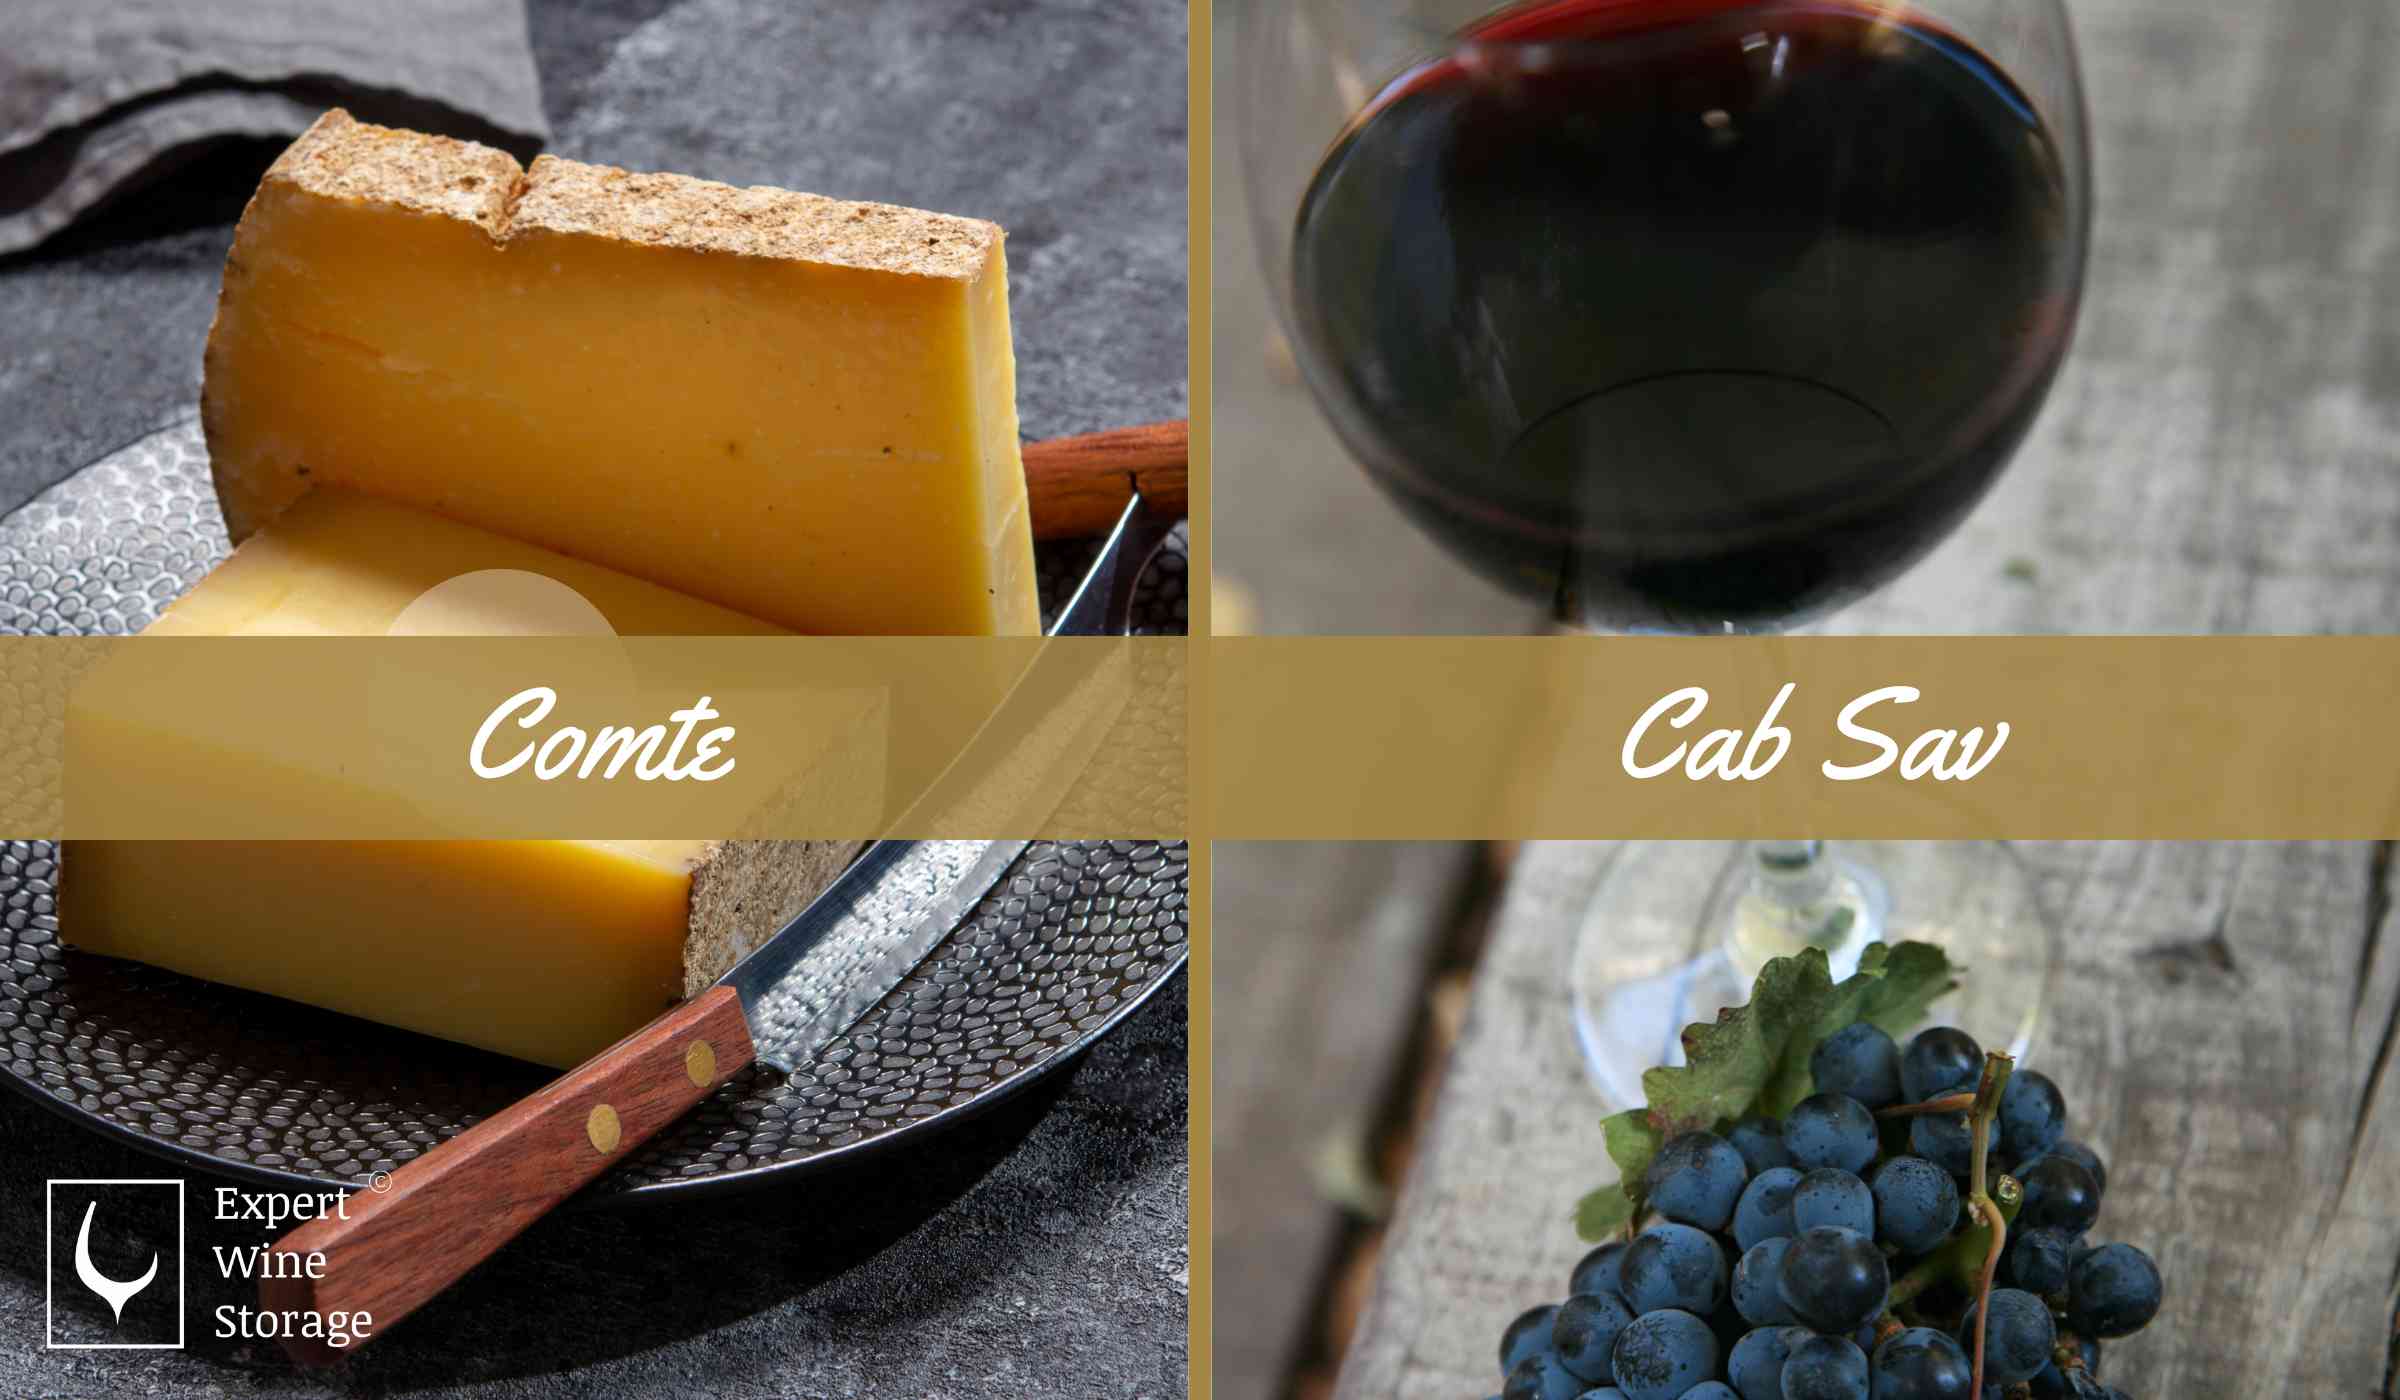 Comte Cheese paired with Cab Sav